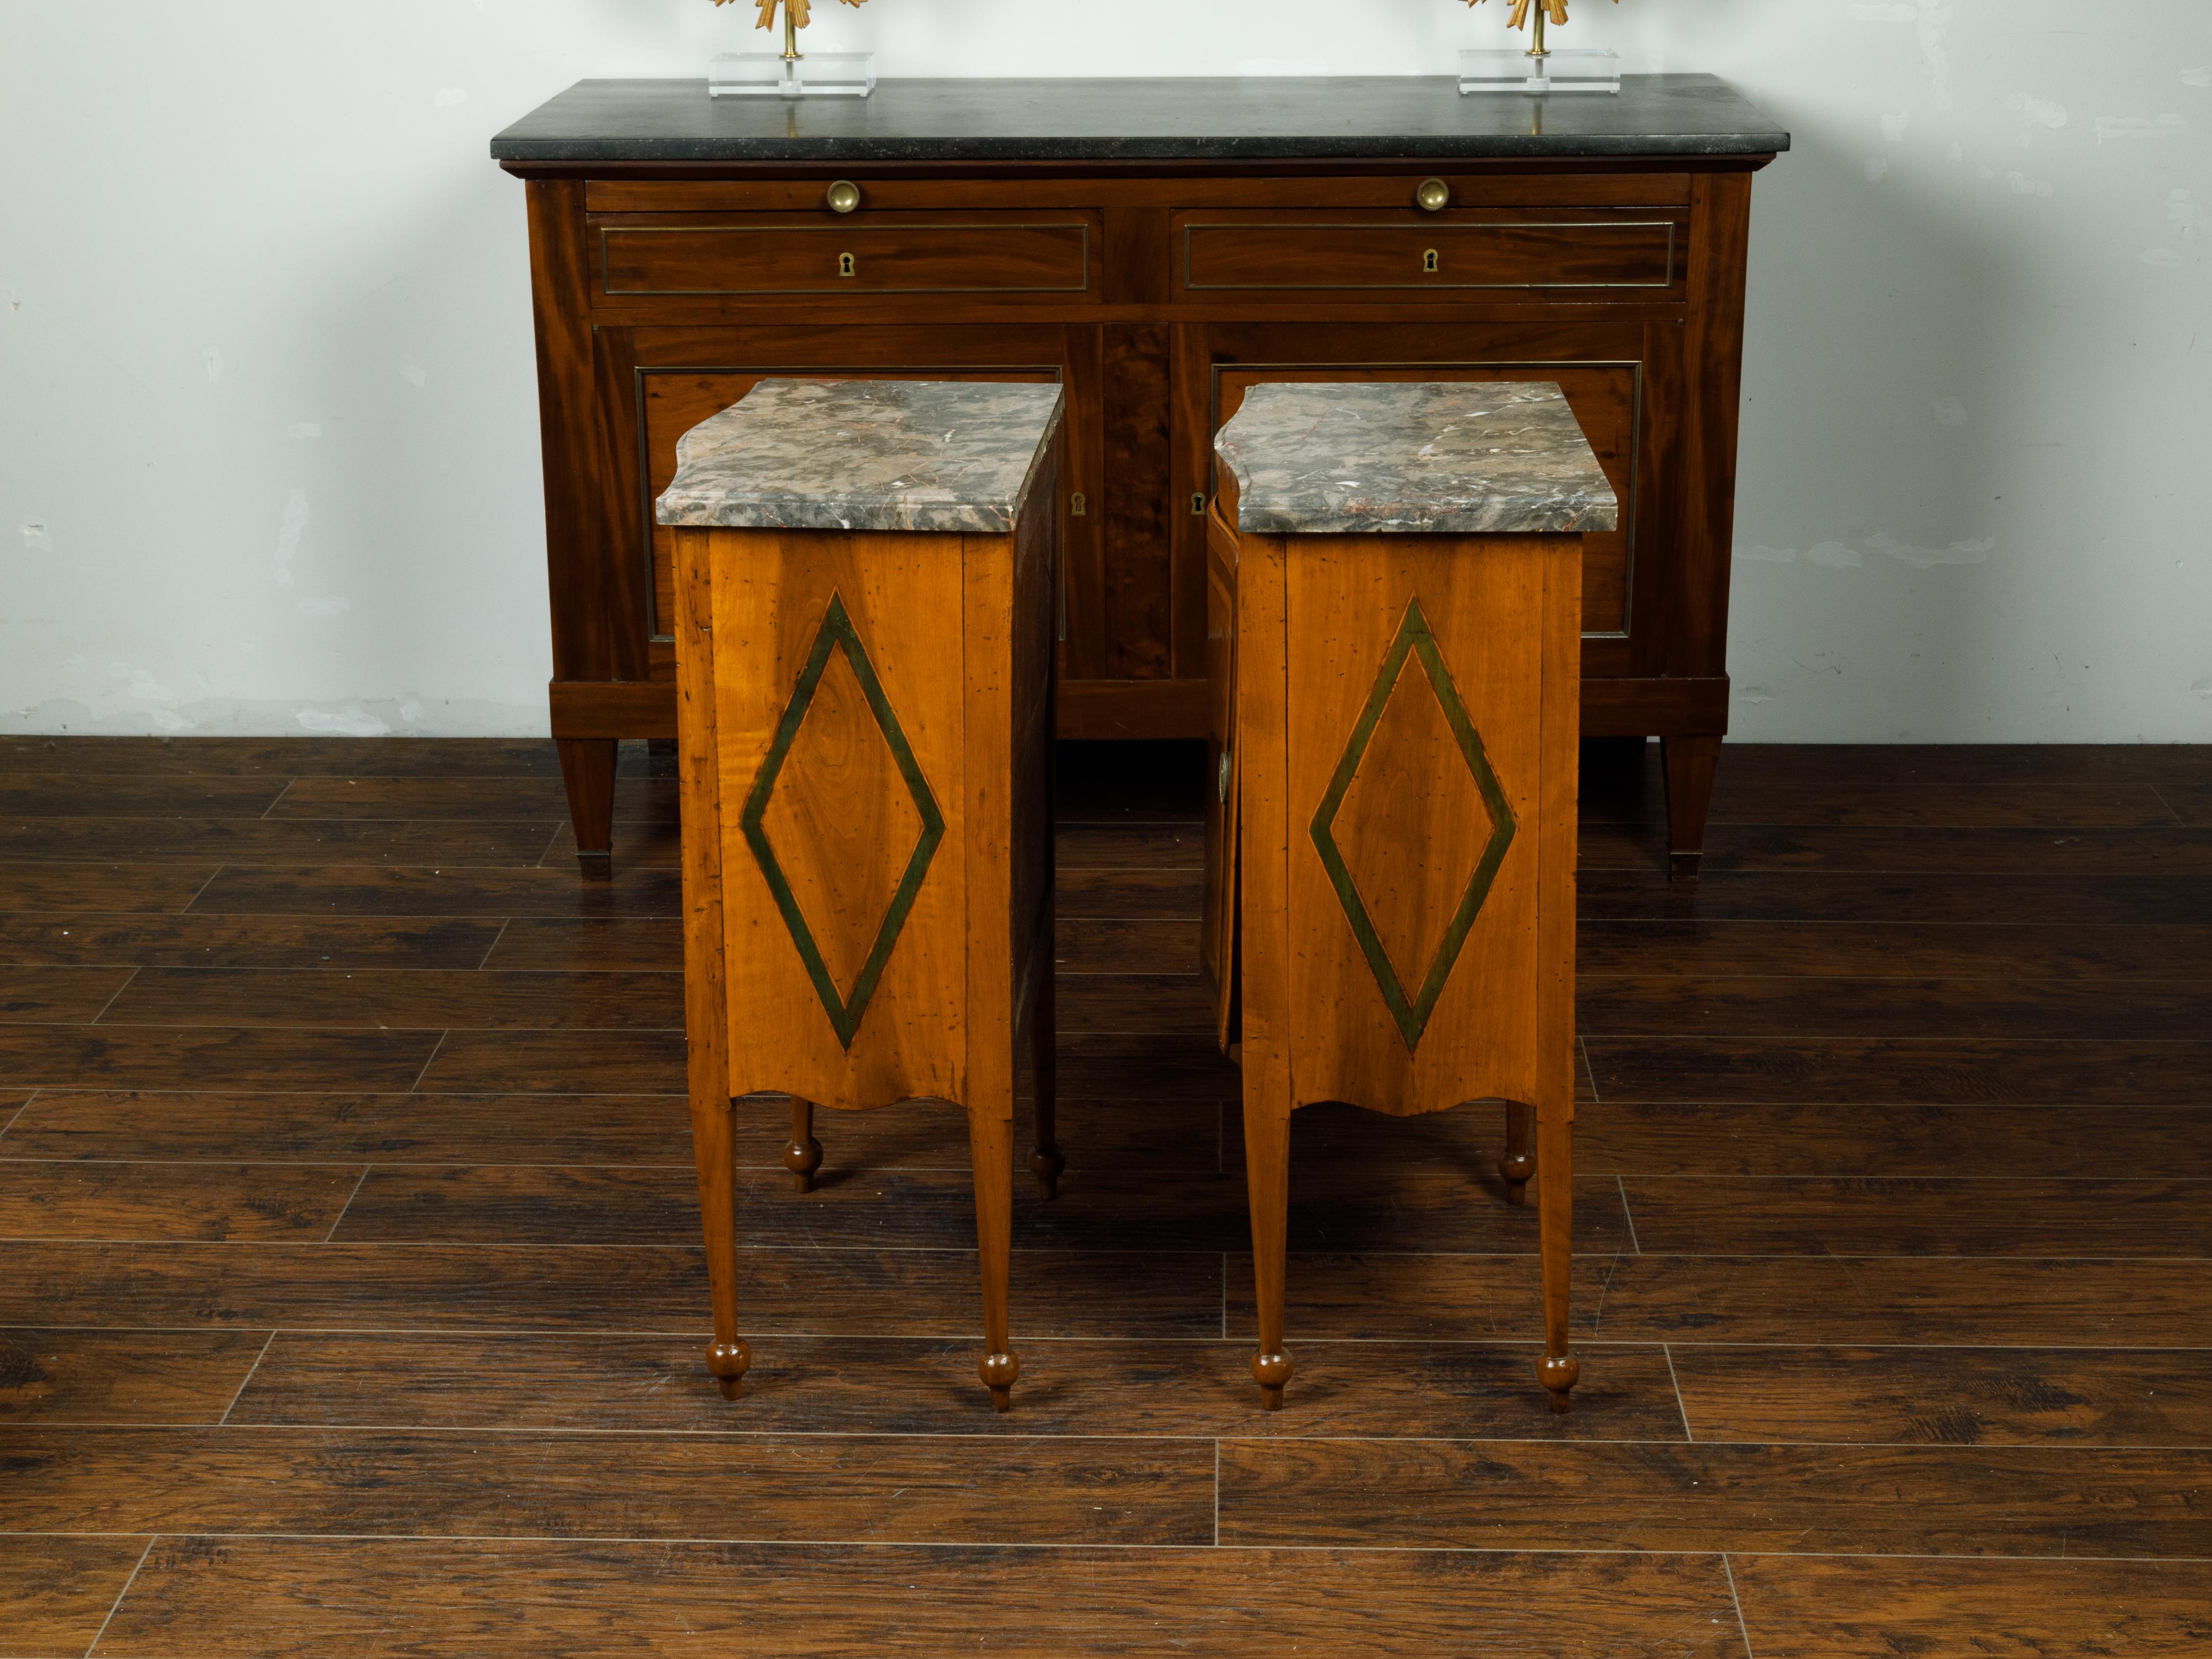 Pair of Italian 1840s Walnut Tables with Variegated Marble Top and Single Door For Sale 5